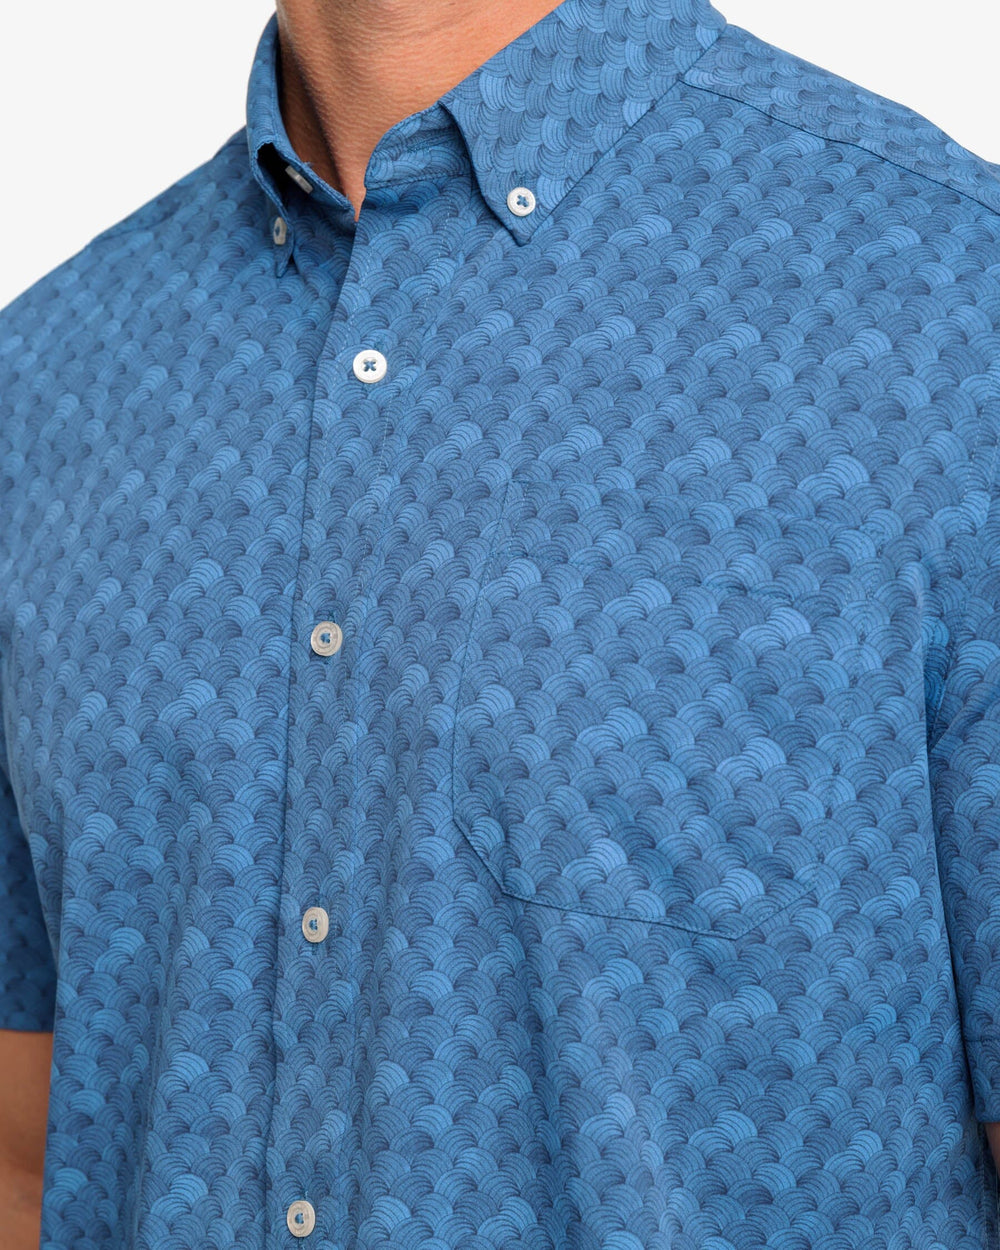 The detail view of the Southern Tide Monterrey Print Intercoastal Short Sleeve Button Down by Southern Tide - Aged Denim